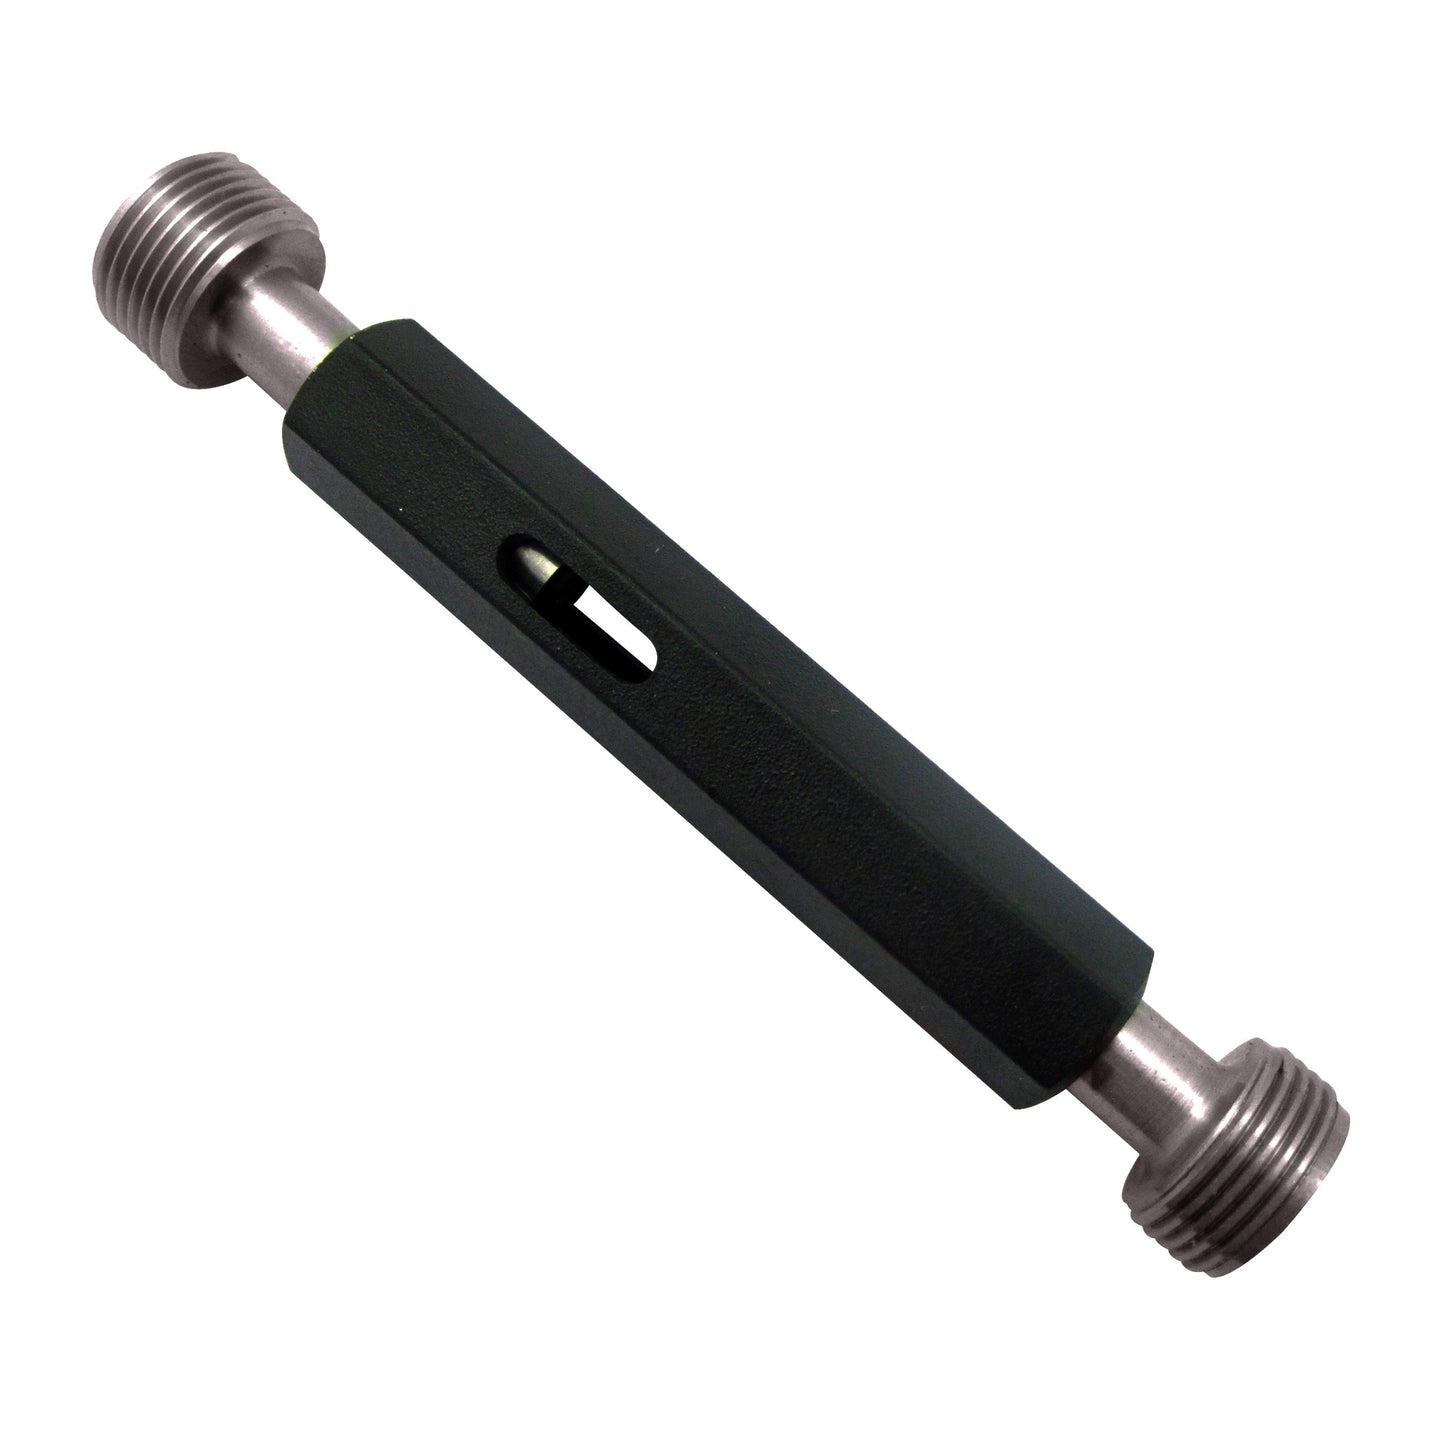 7/8" - 36 Unified Right Hand Thread Plug Gauge